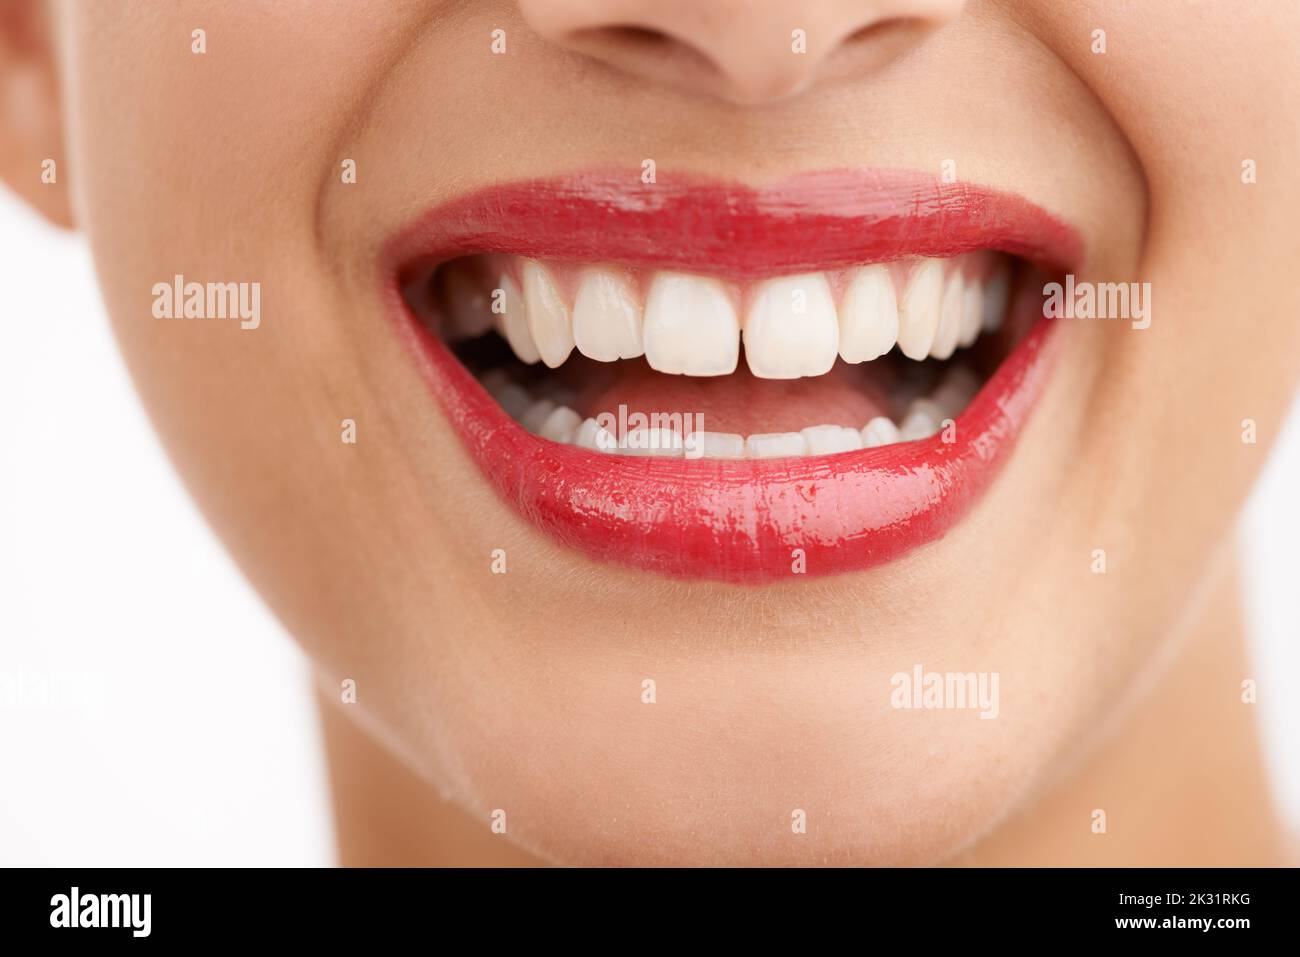 A shiny white smile. Cropped closeup shot of a beautiful young womans mouth. Stock Photo